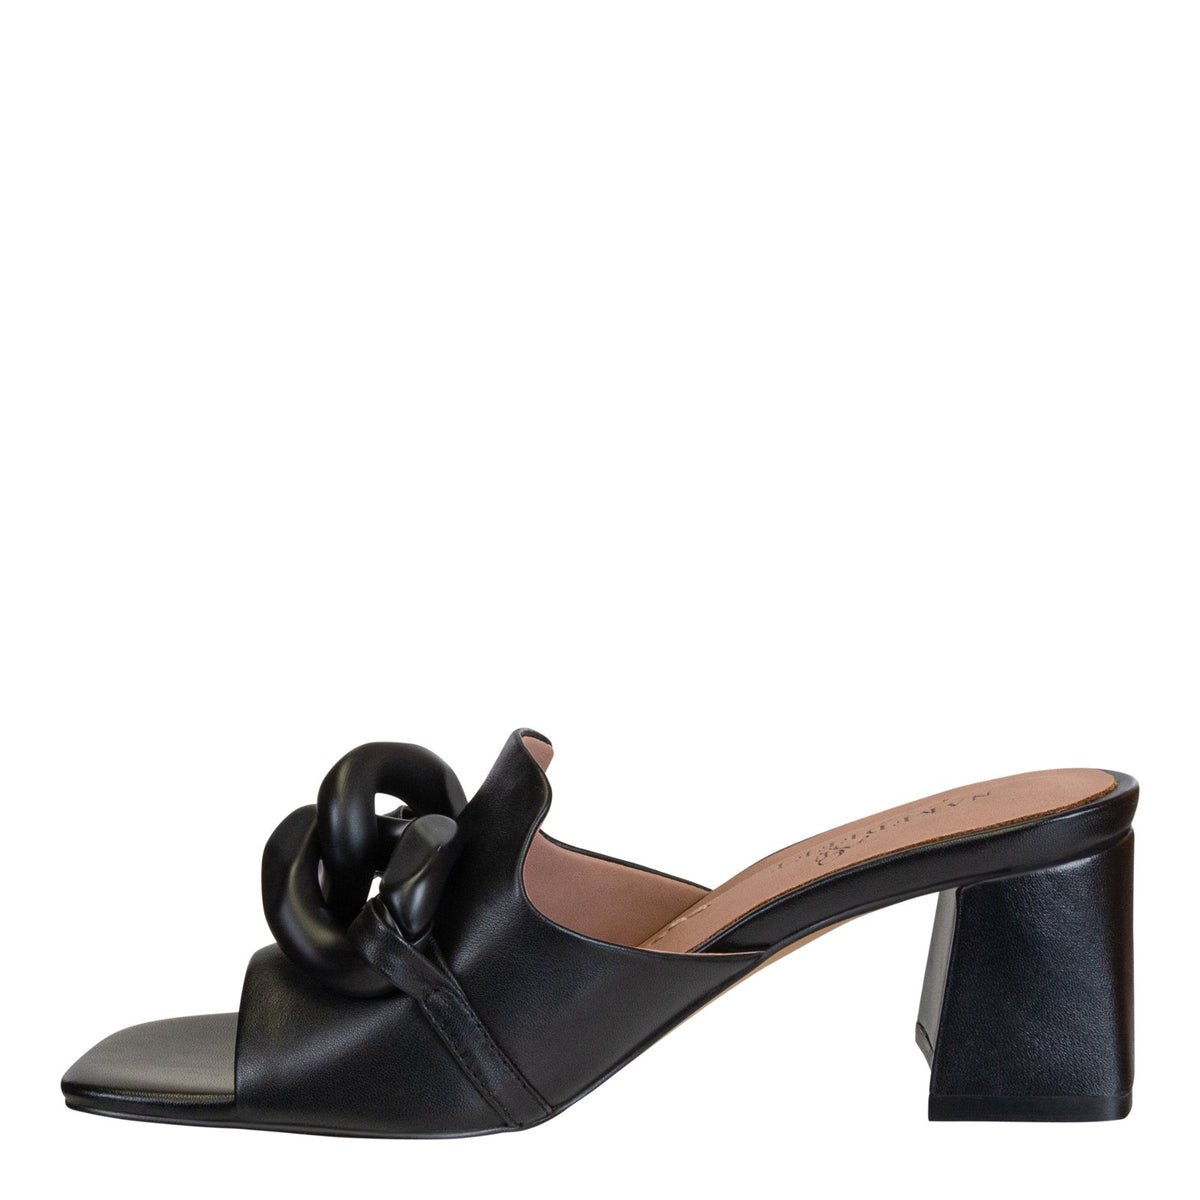 Naked Feet: COTERIE in BLACK Heeled Sandals - J. Cole Shoes